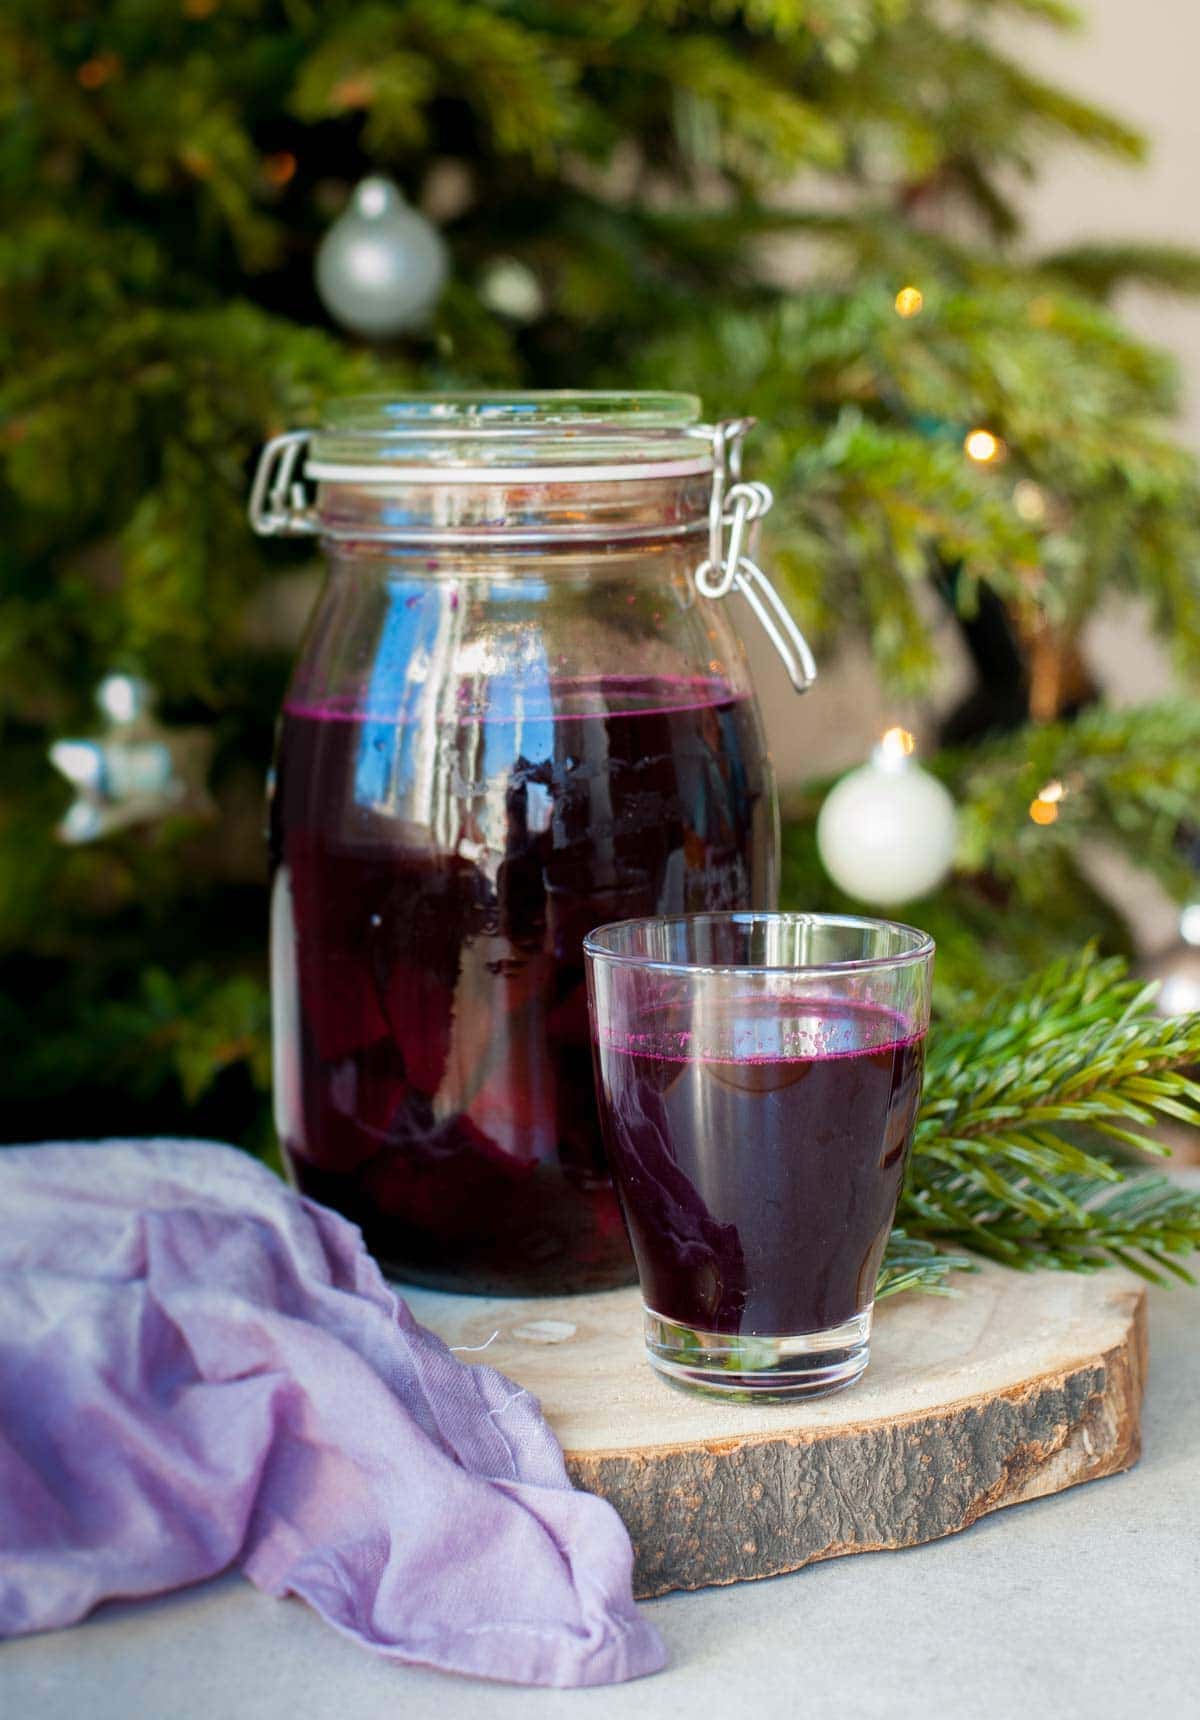 Beet kvass in a jar and a glass, Christmas tree in the background.